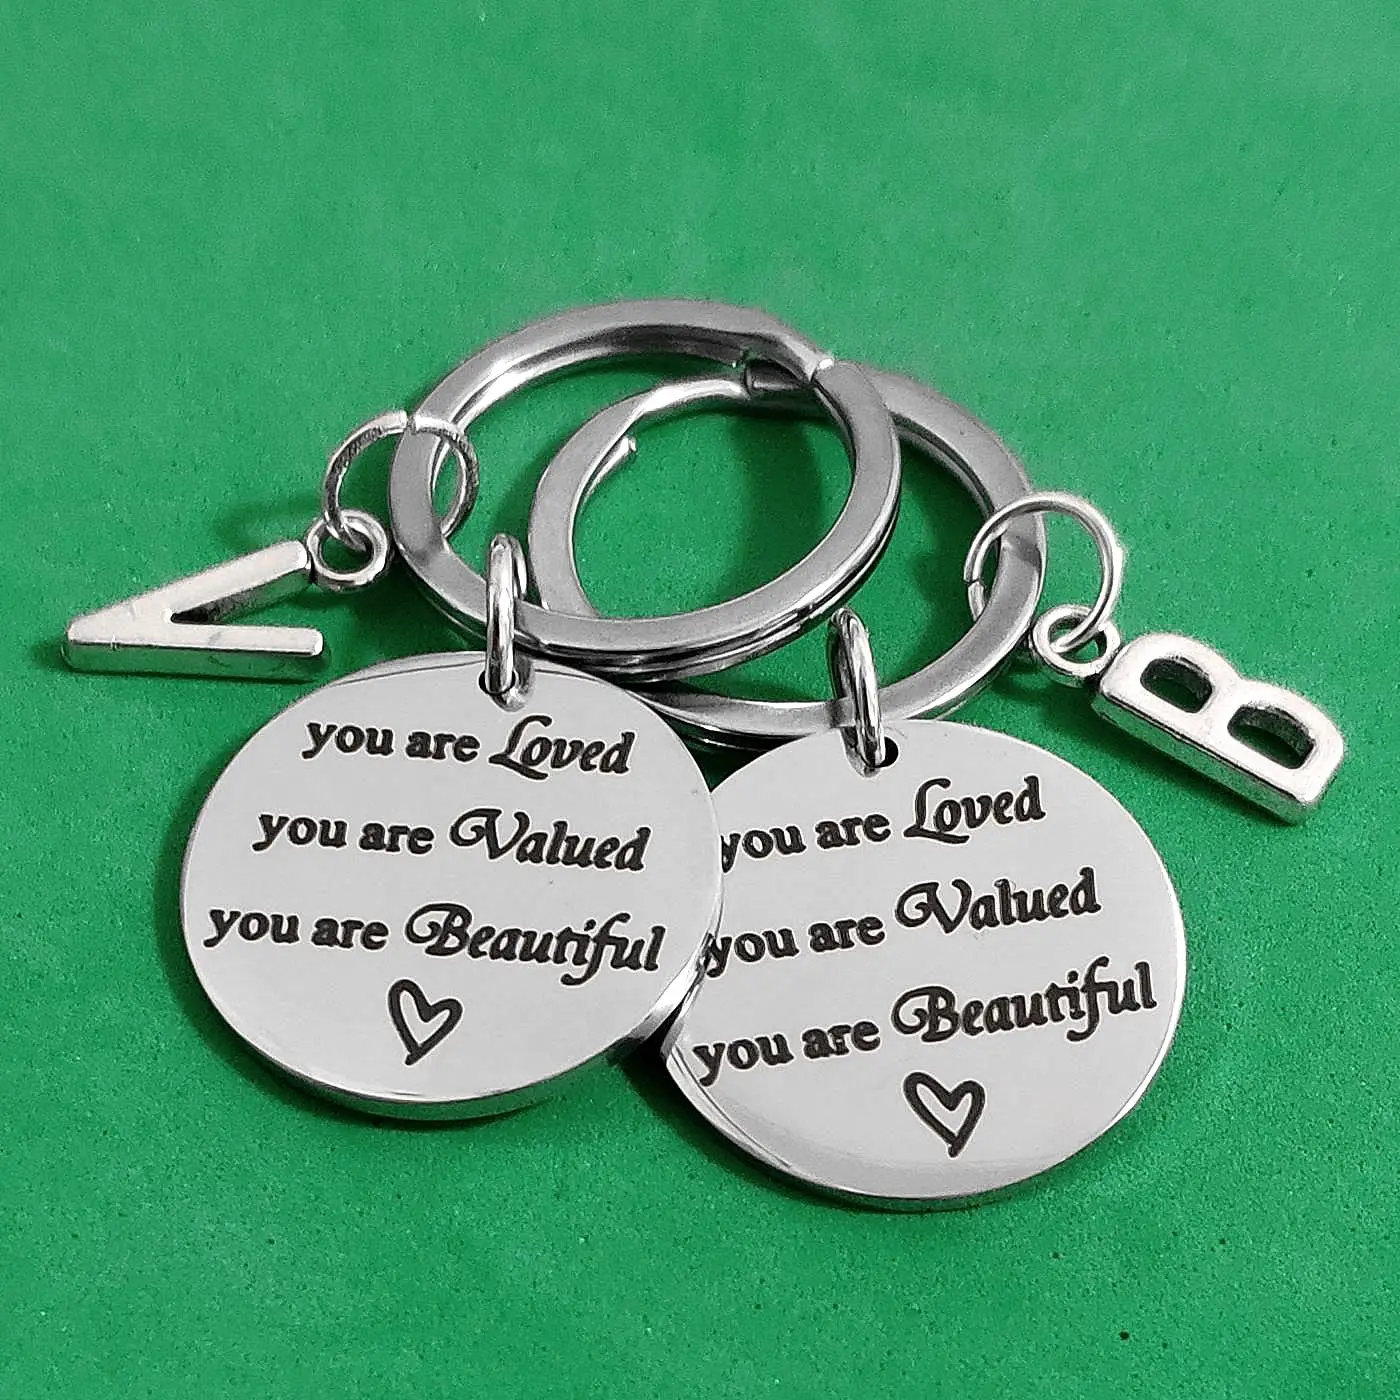 

26 Letters Ornaments Creative Lanyard for Keys Gift Lettering Keyring You Are Loved Valued Beautiful Stainless Steel Carabiner